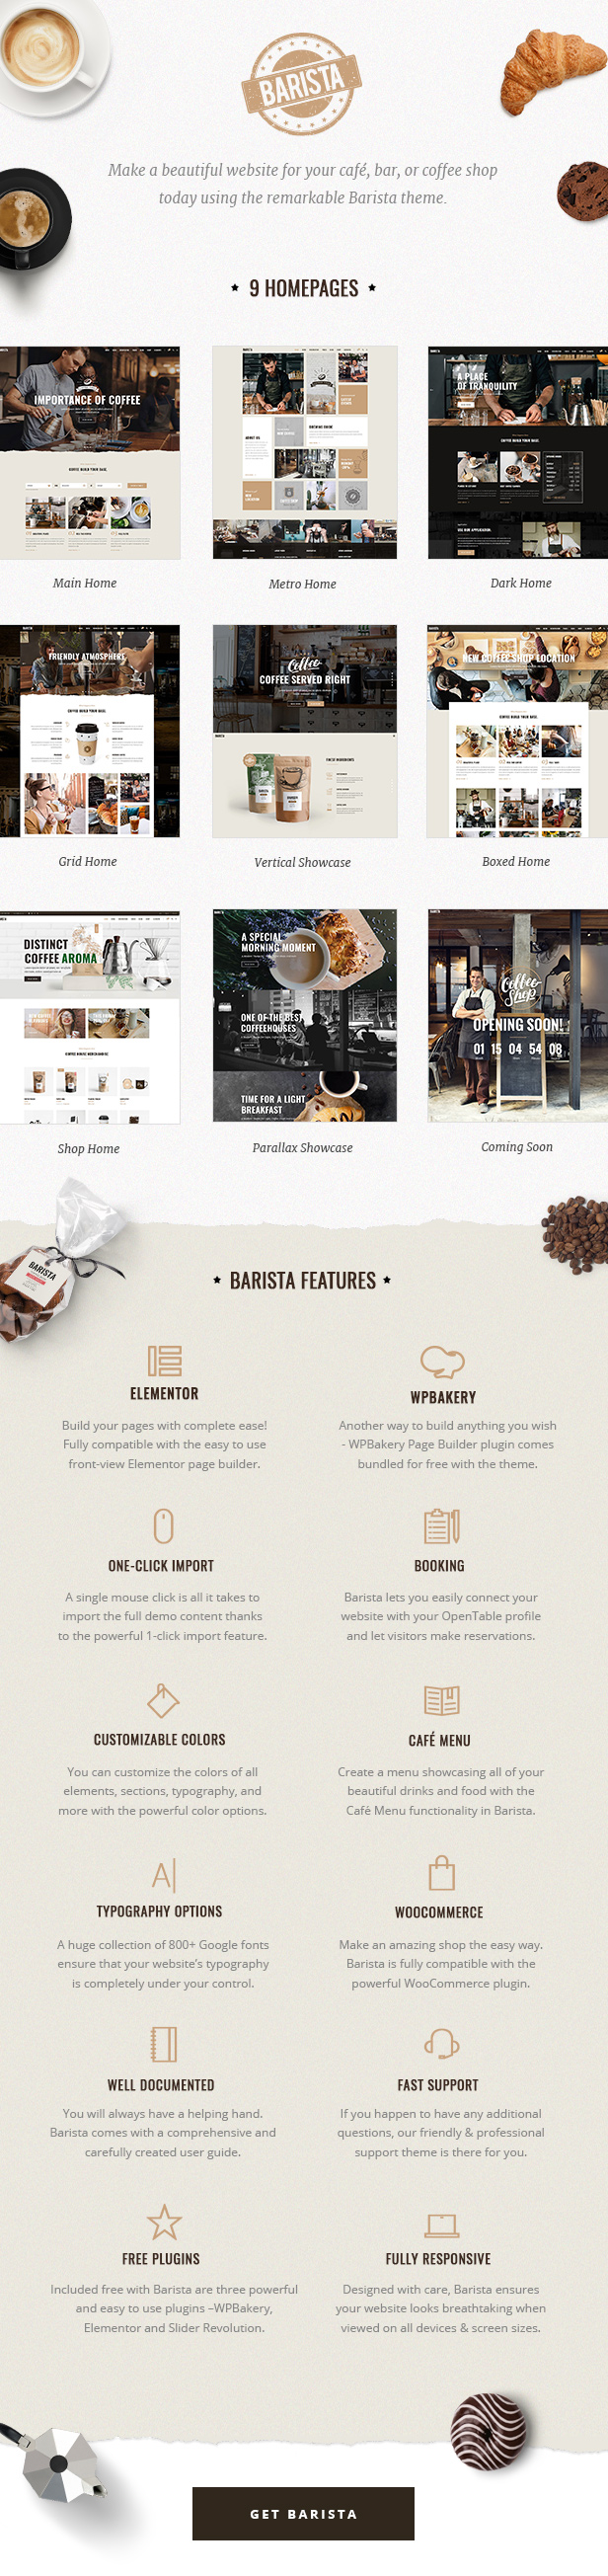 Barista - Modern Theme for Cafes, Coffee Shops and Bars - 2